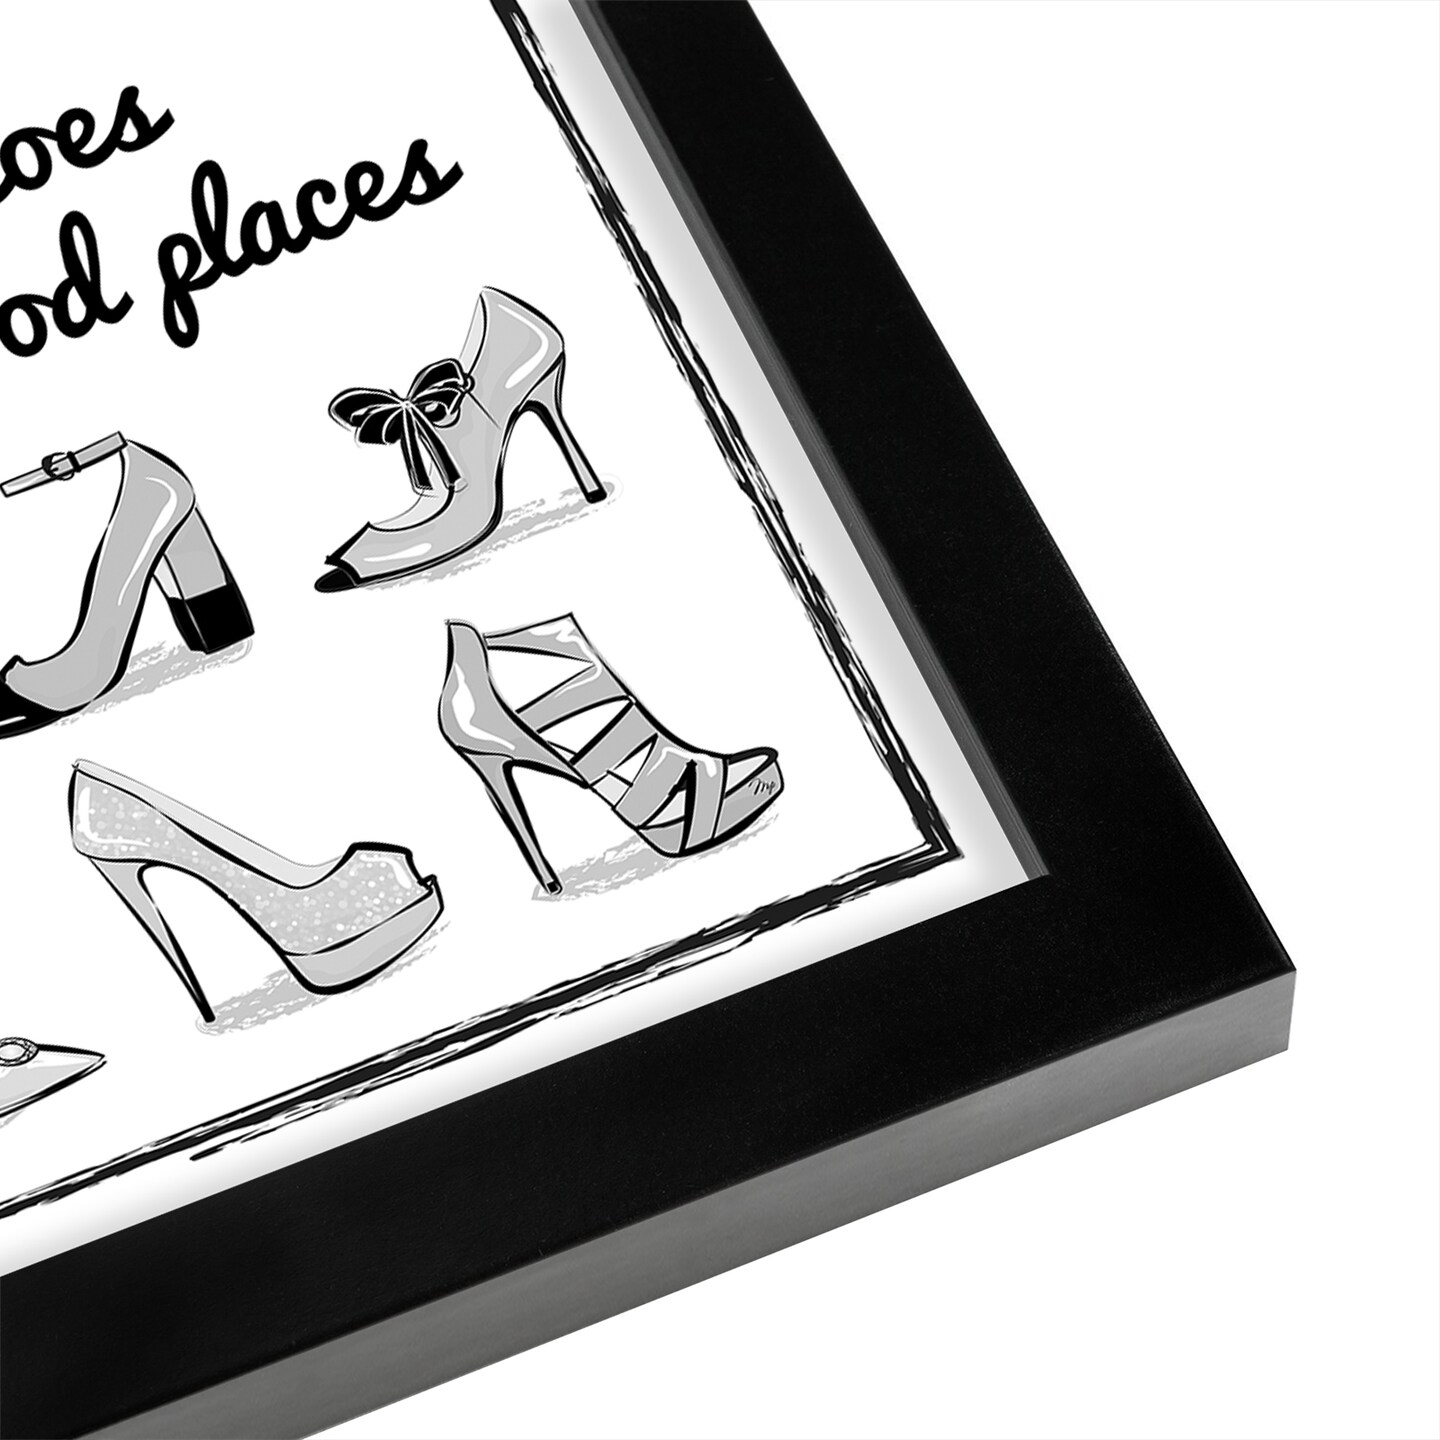 Heels Quote by Martina Frame  - Americanflat